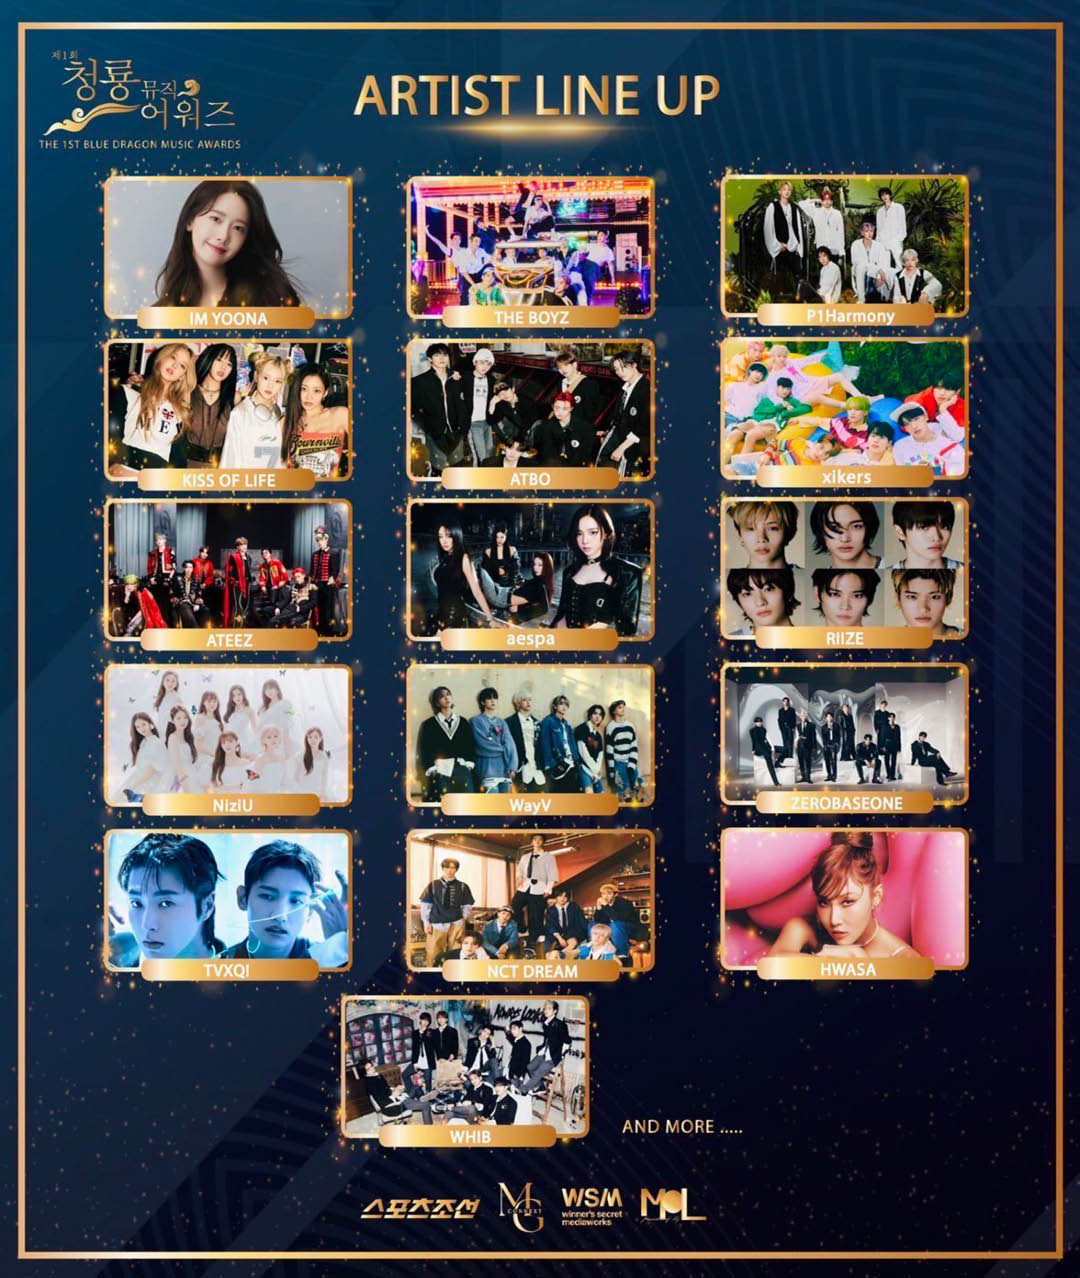 The 1st Blue Dragon Music Awards